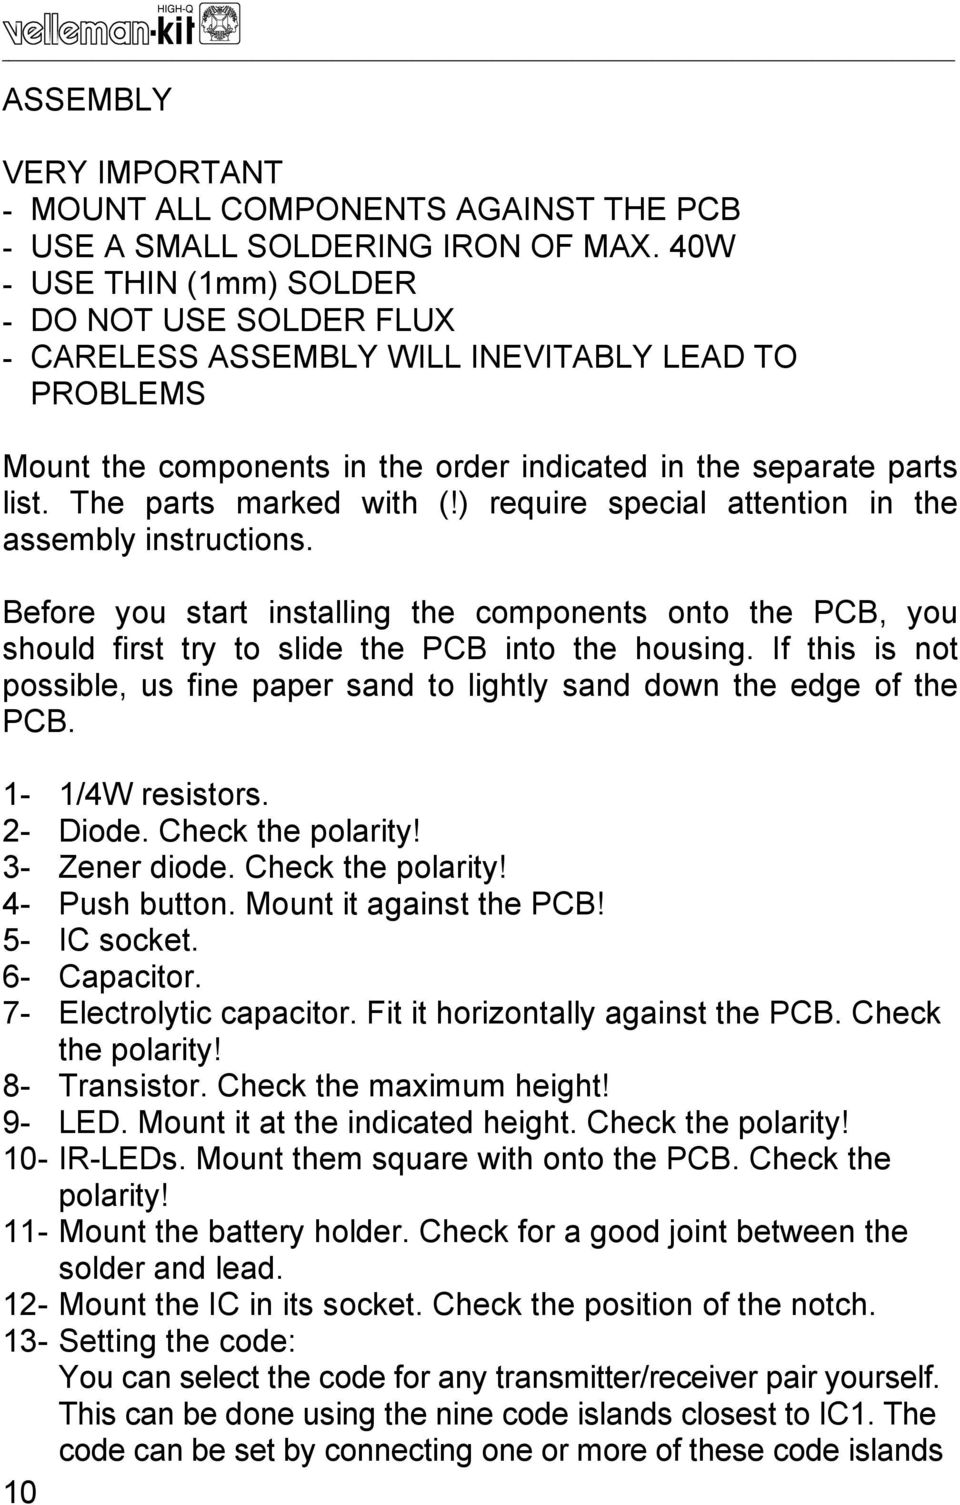 The parts marked with (!) require special attention in the assembly instructions. Before you start installing the components onto the PCB, you should first try to slide the PCB into the housing.